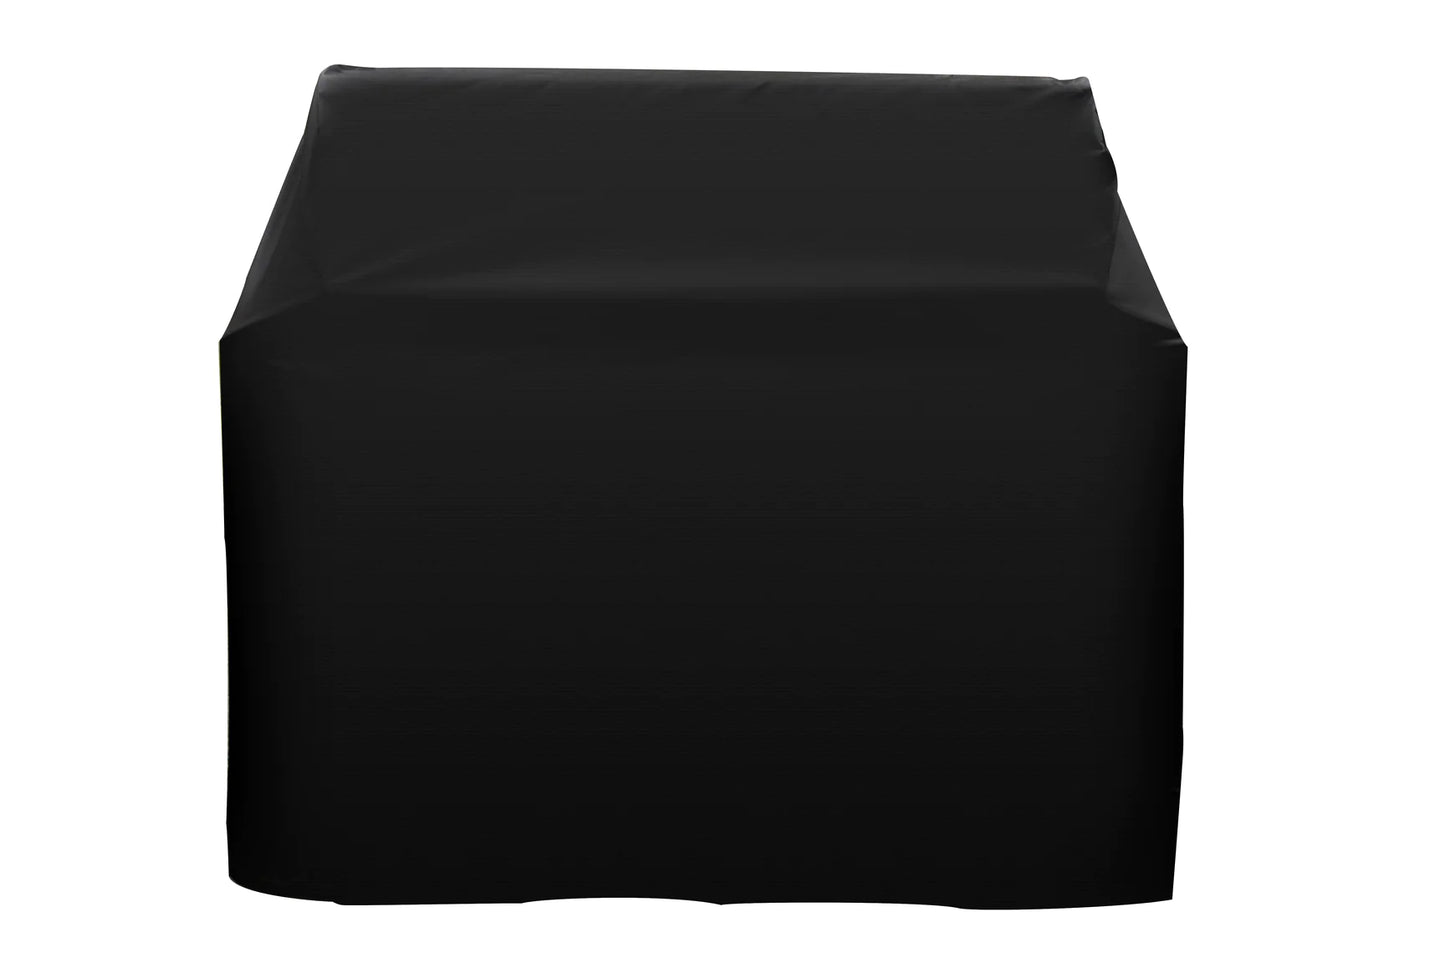 32" Freestanding Deluxe Grill Cover